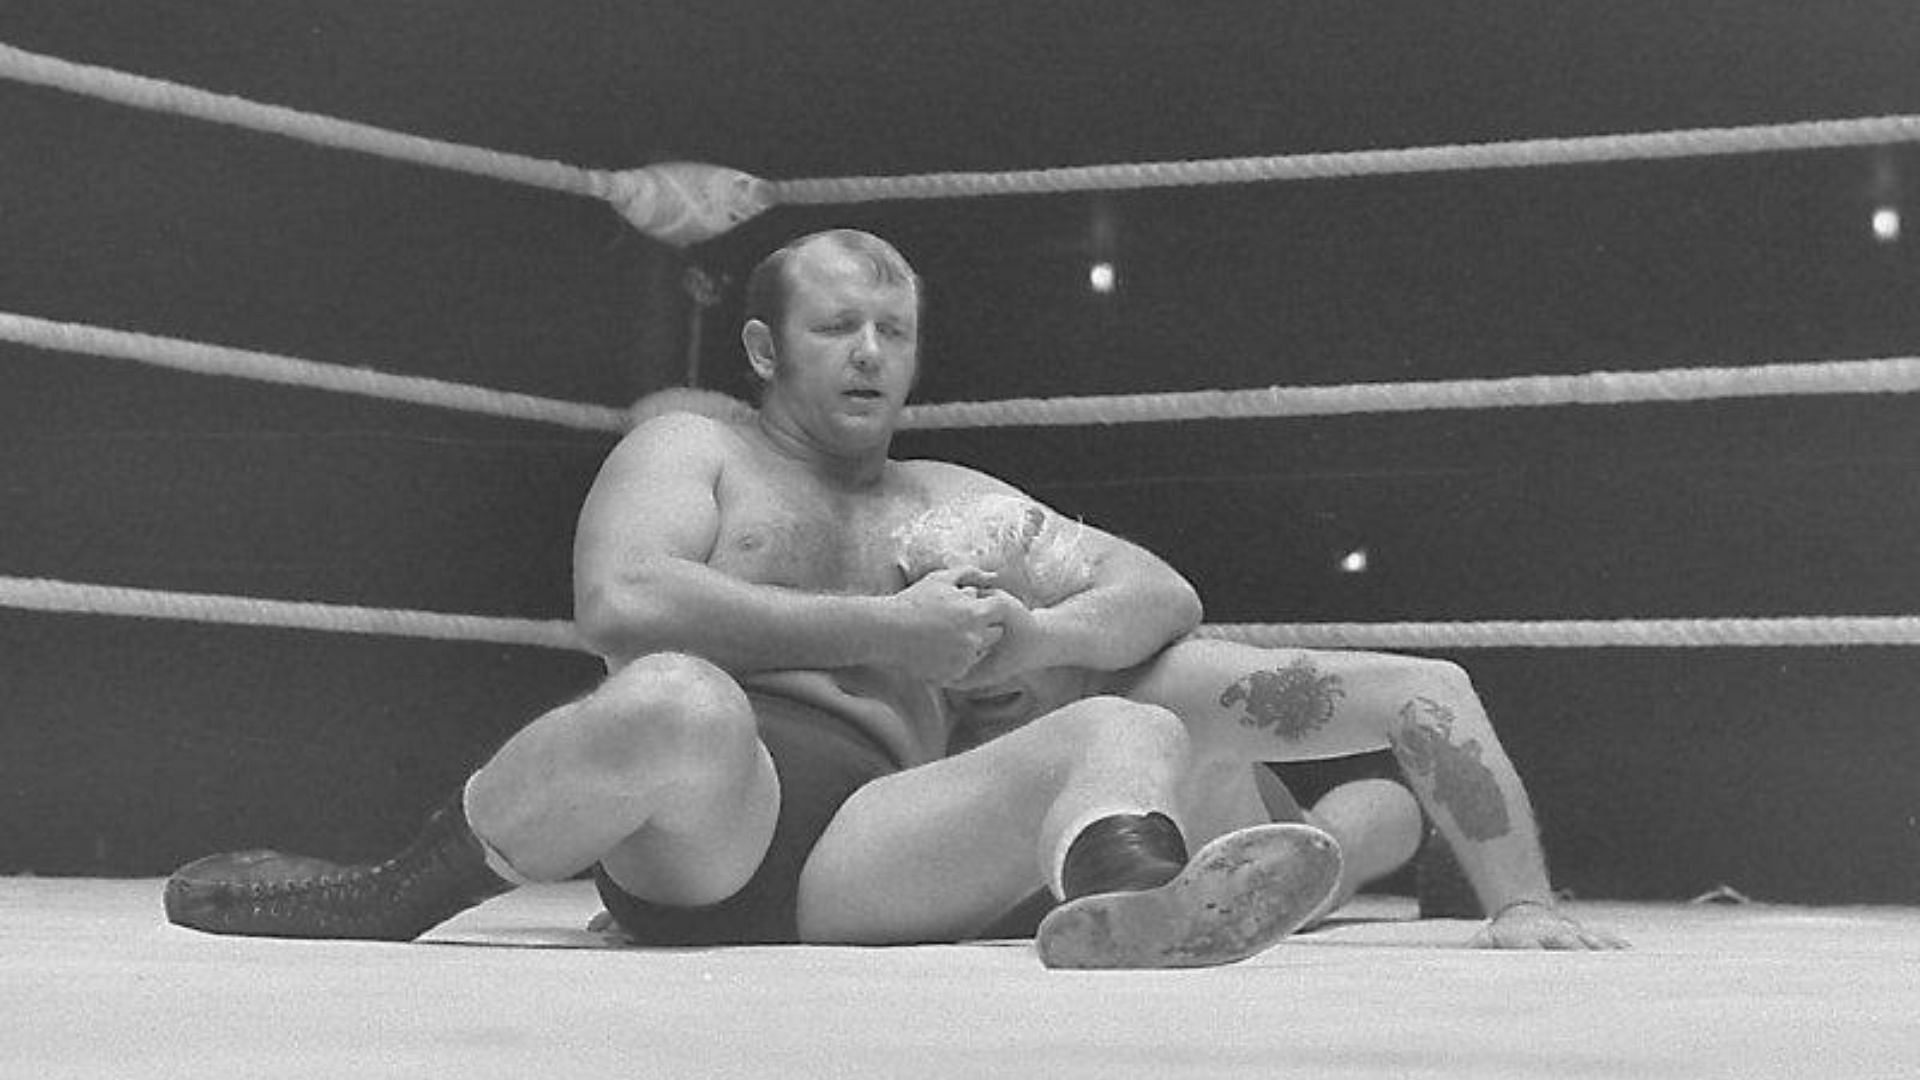 Dory Funk Jr was recently interviewed by Bill Apter